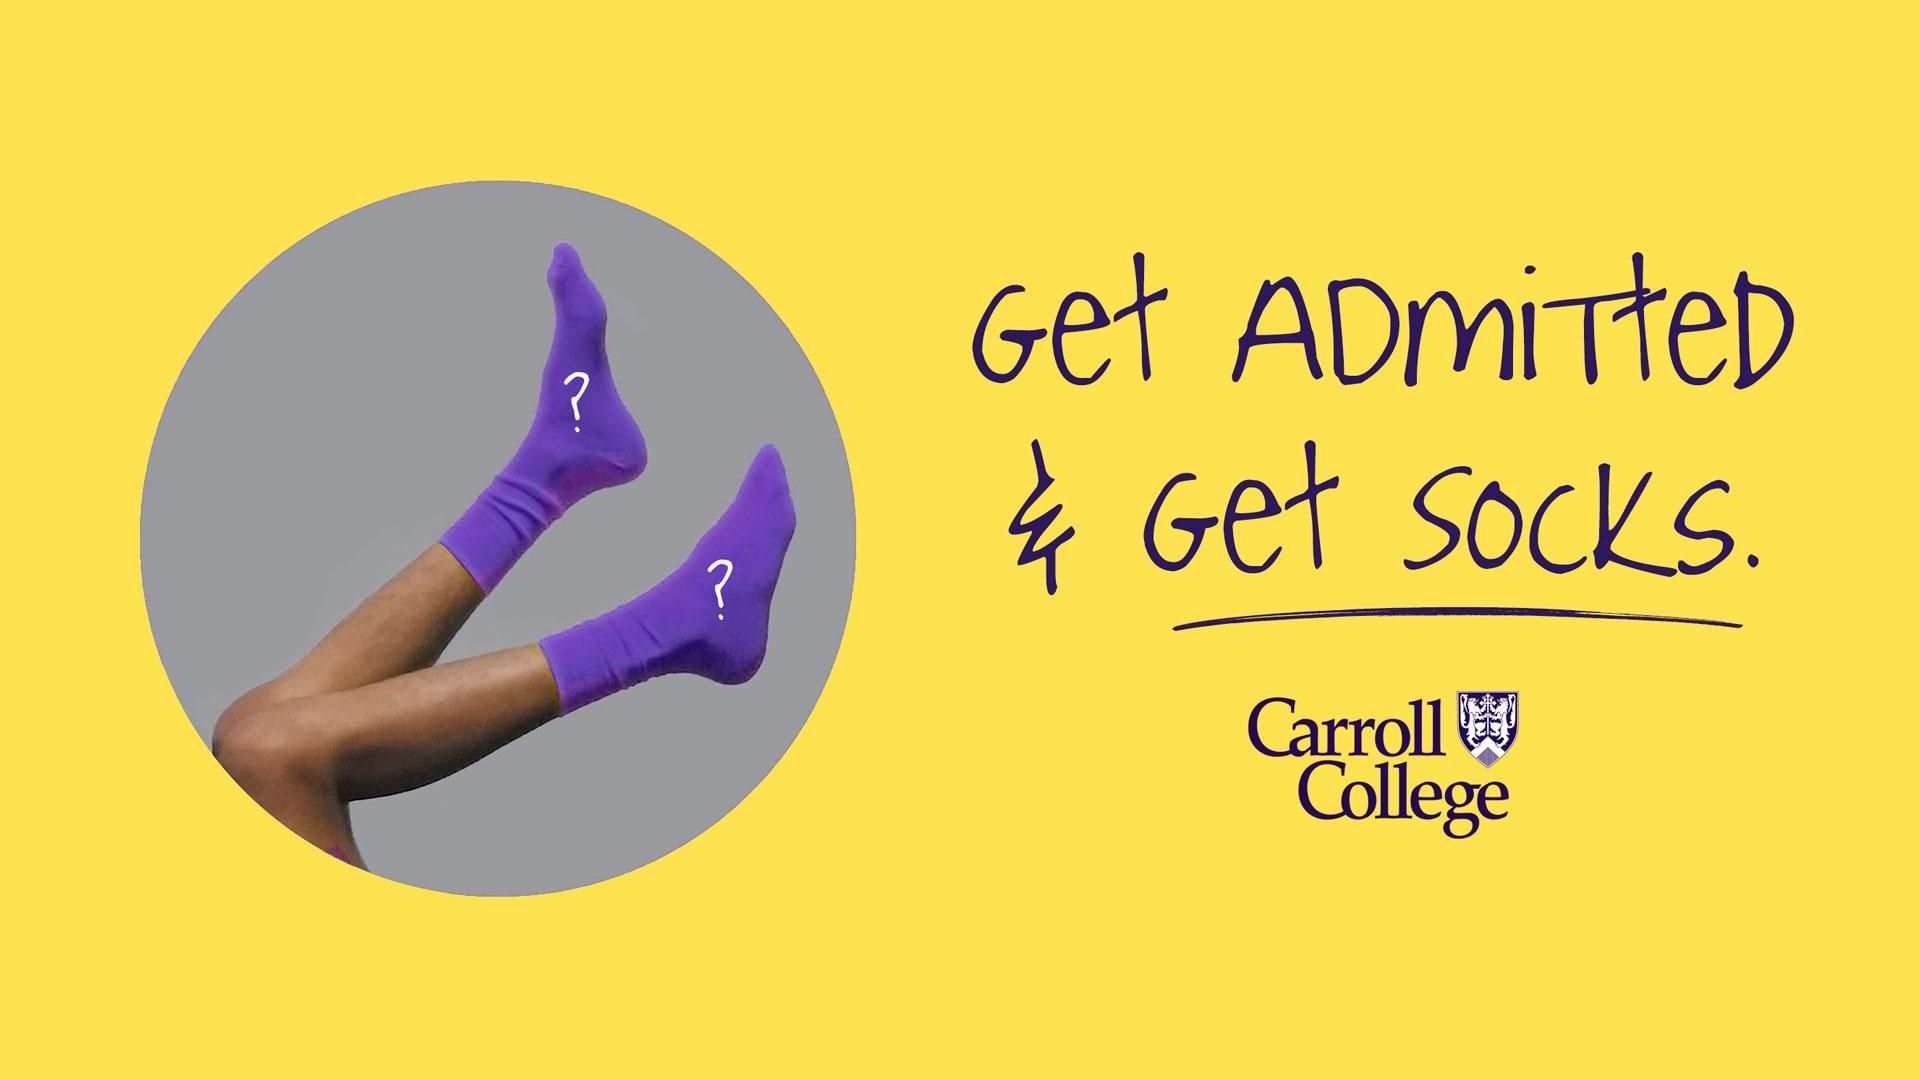 Get Admitted and Get Socks